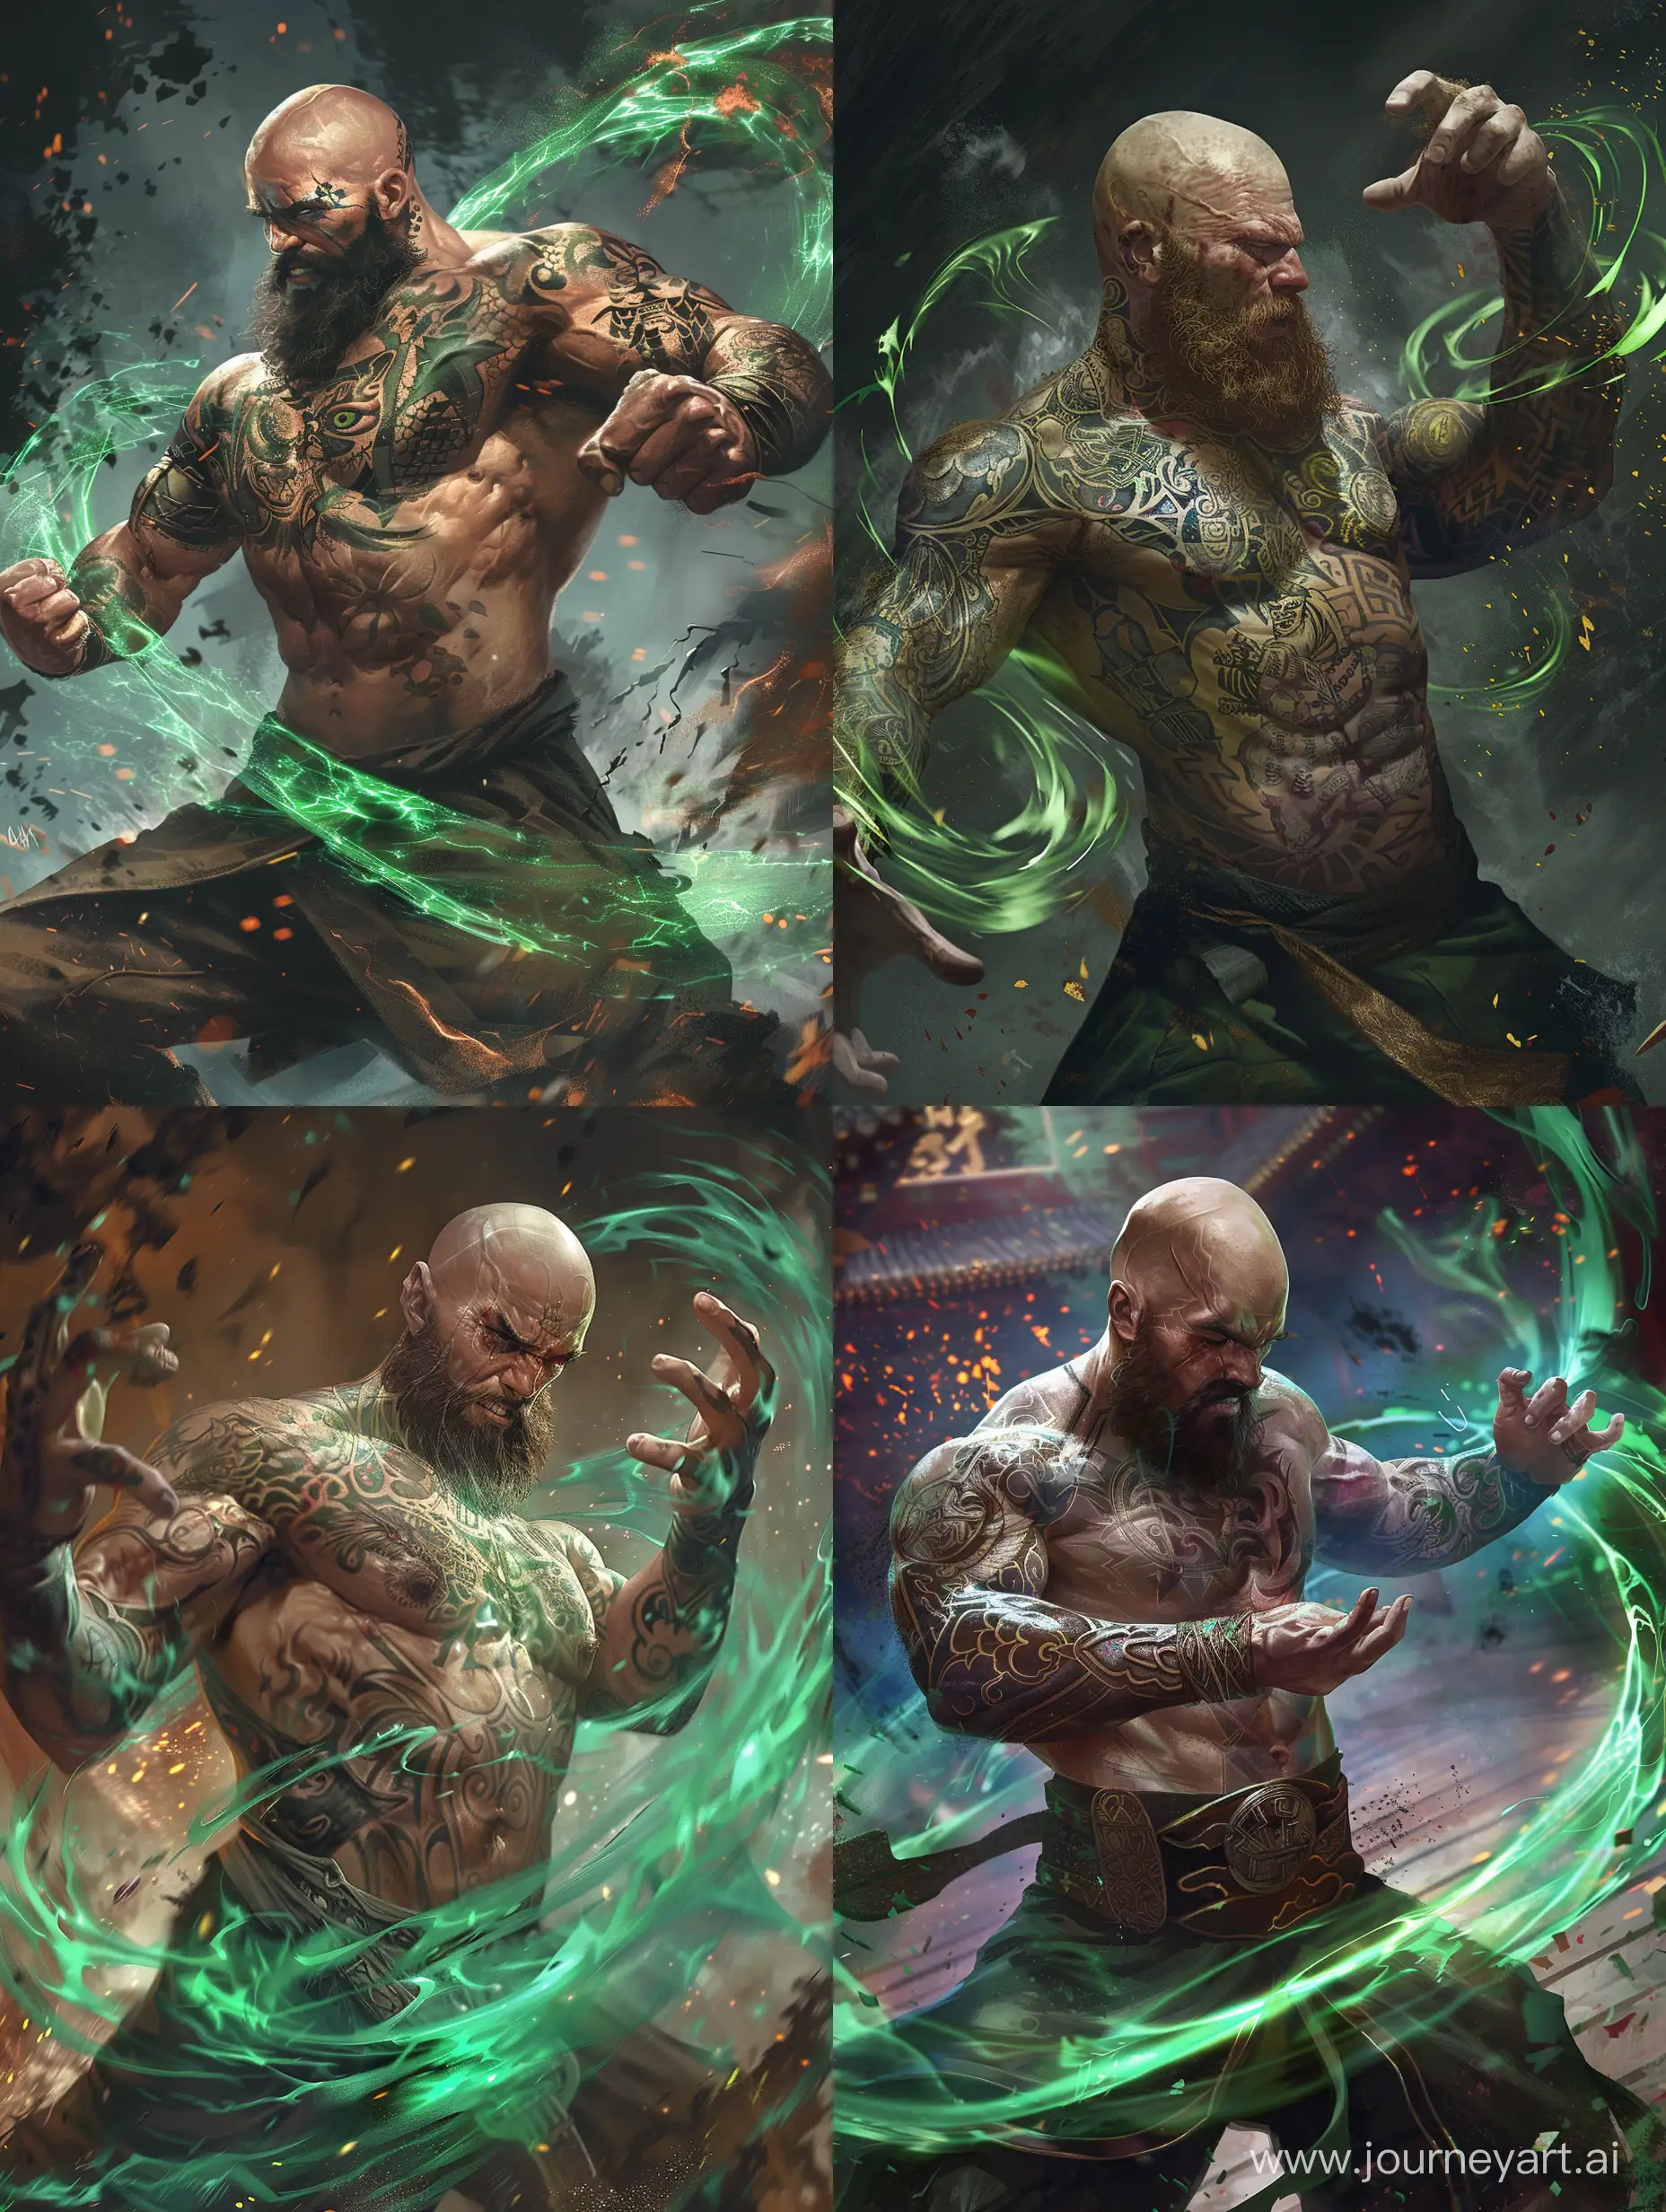 Bald, bearded, muscular guy, his whole body covered in tattoos, bare torso, fighter in the arena, engages in hand-to-hand combat. A monk, green energy pulsating and swirling around his hands. Dark Fantasy with magic. --v 6 --ar 3:4 --no 46